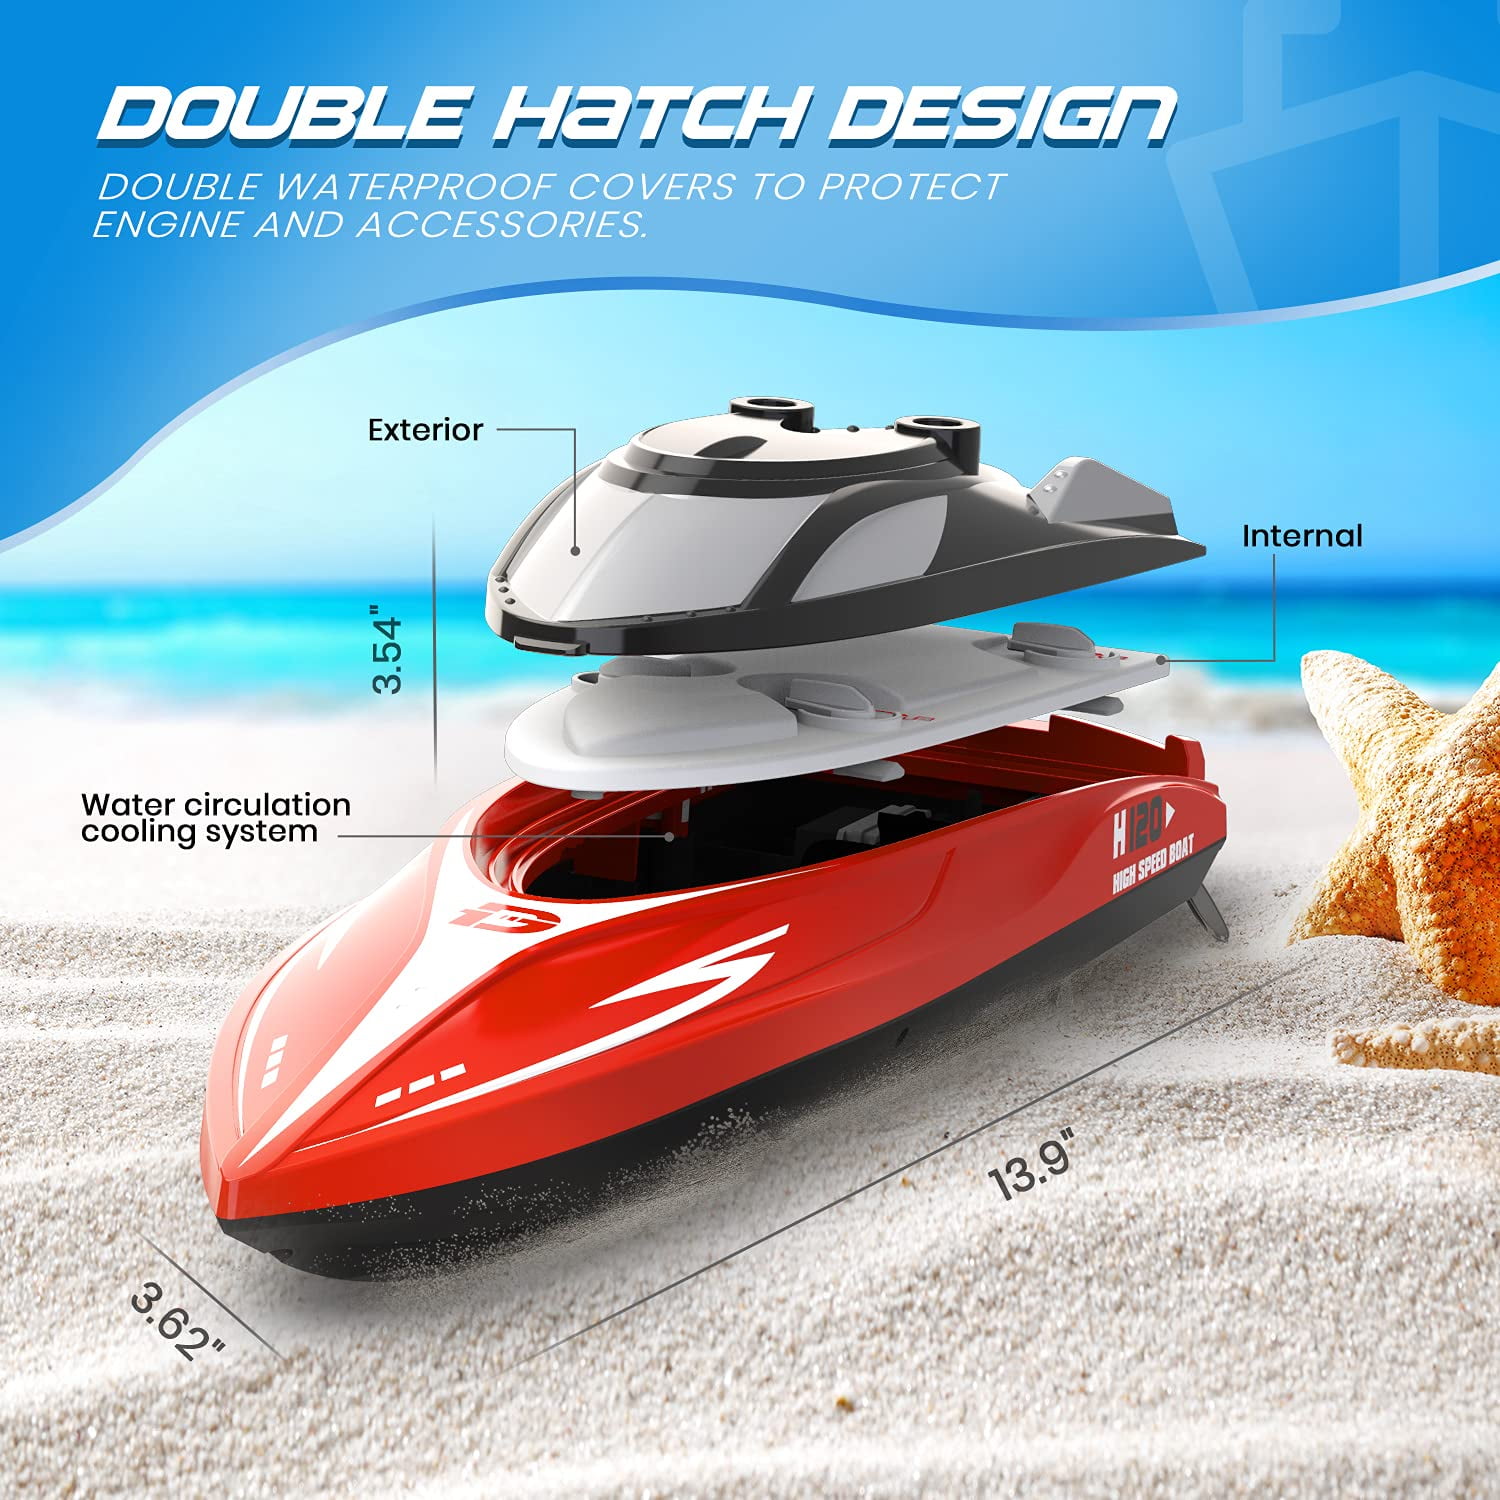 MPH Details about   DEERC Remote Control Boat for Pools & Lakes RC Racing Boat High Speed 20 